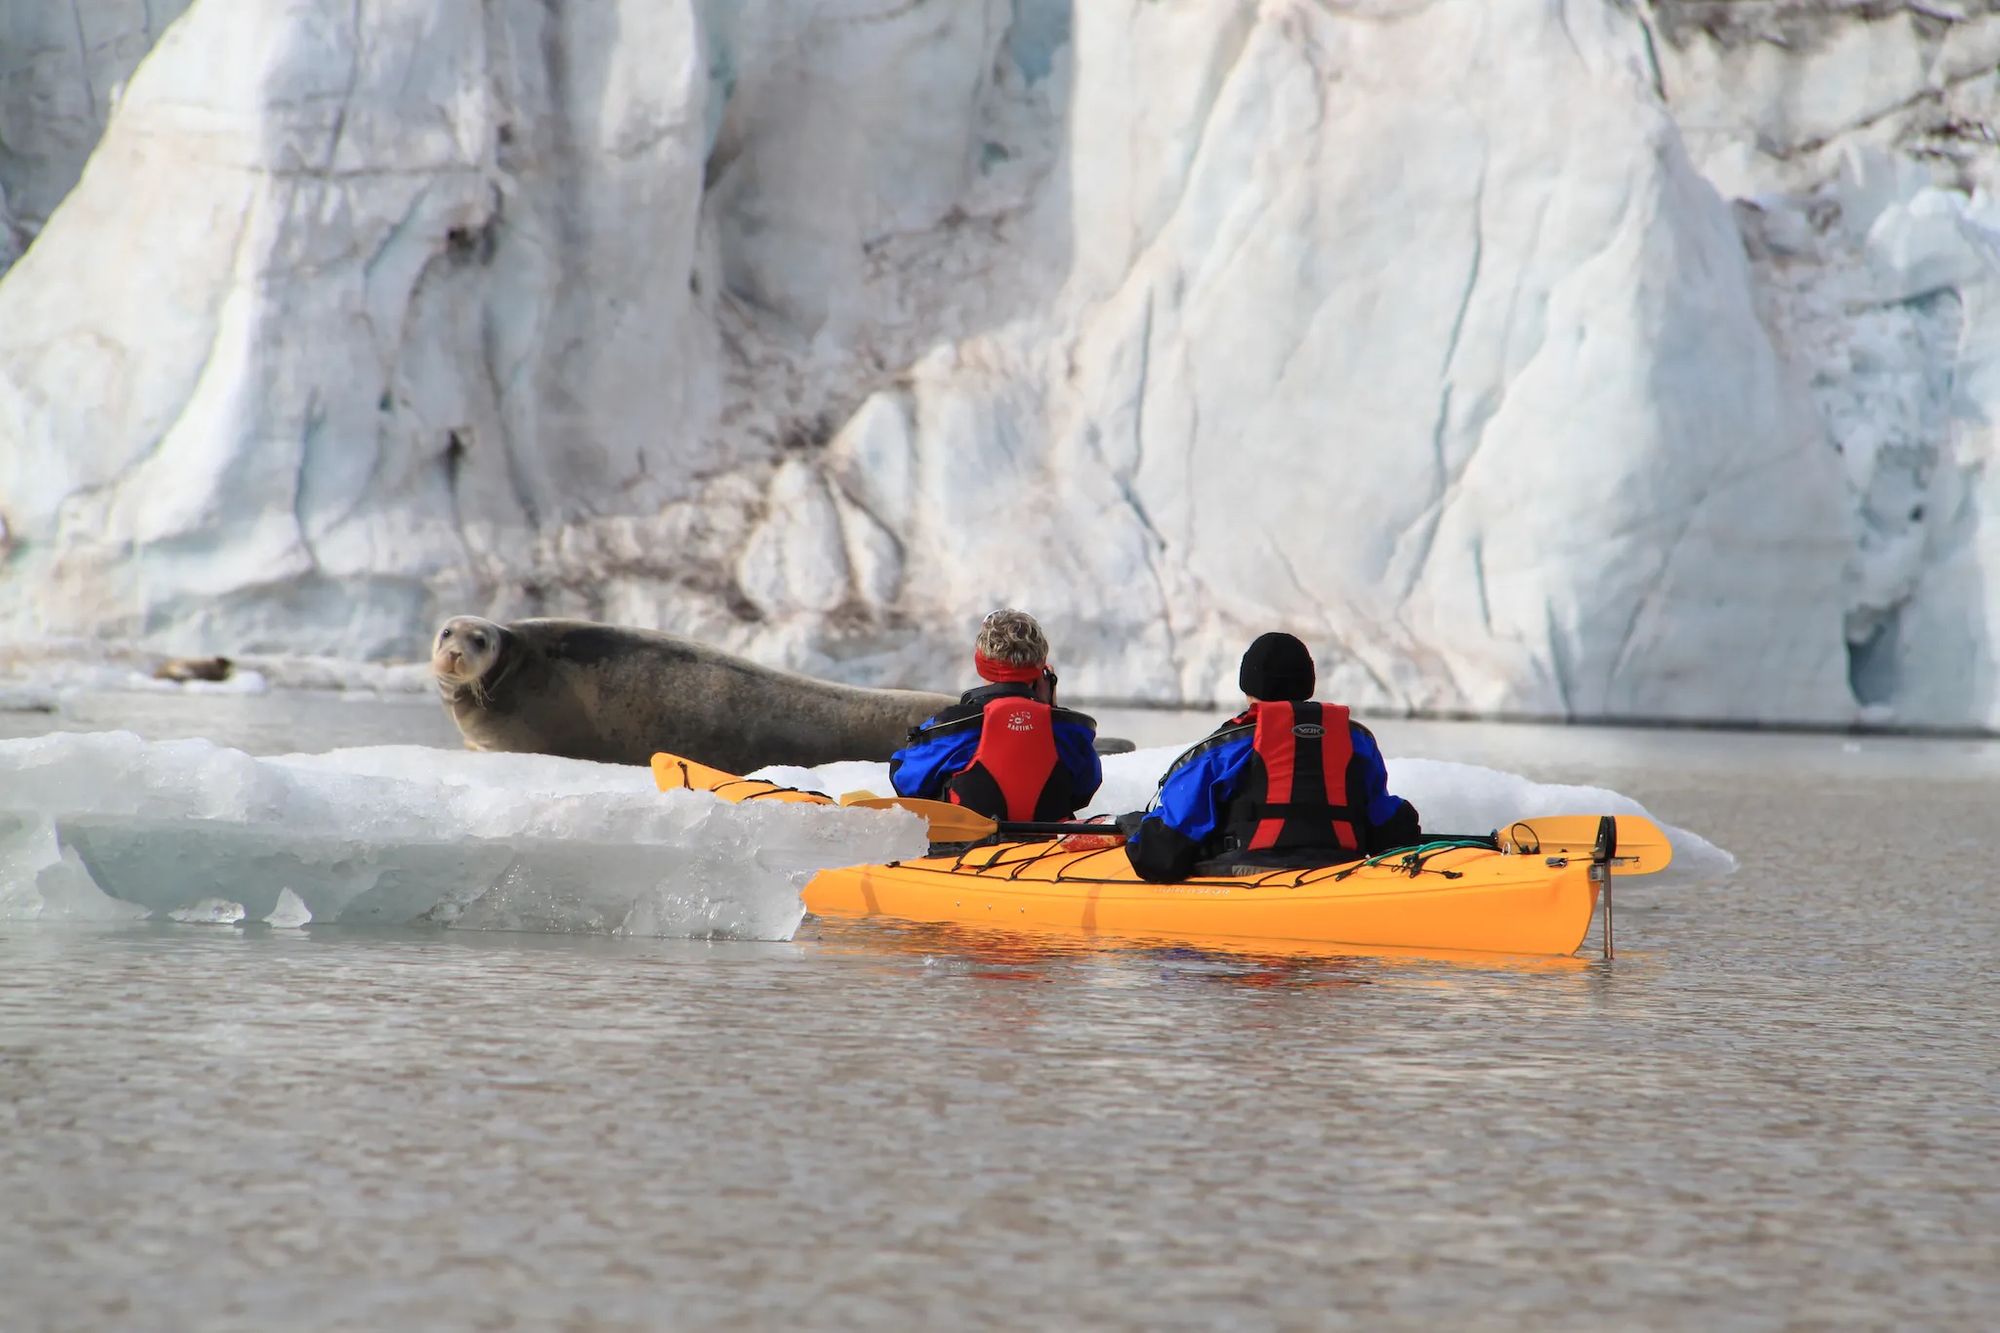 Two kayakers in Svalbard, paddling past an ice floe with a seal on it.